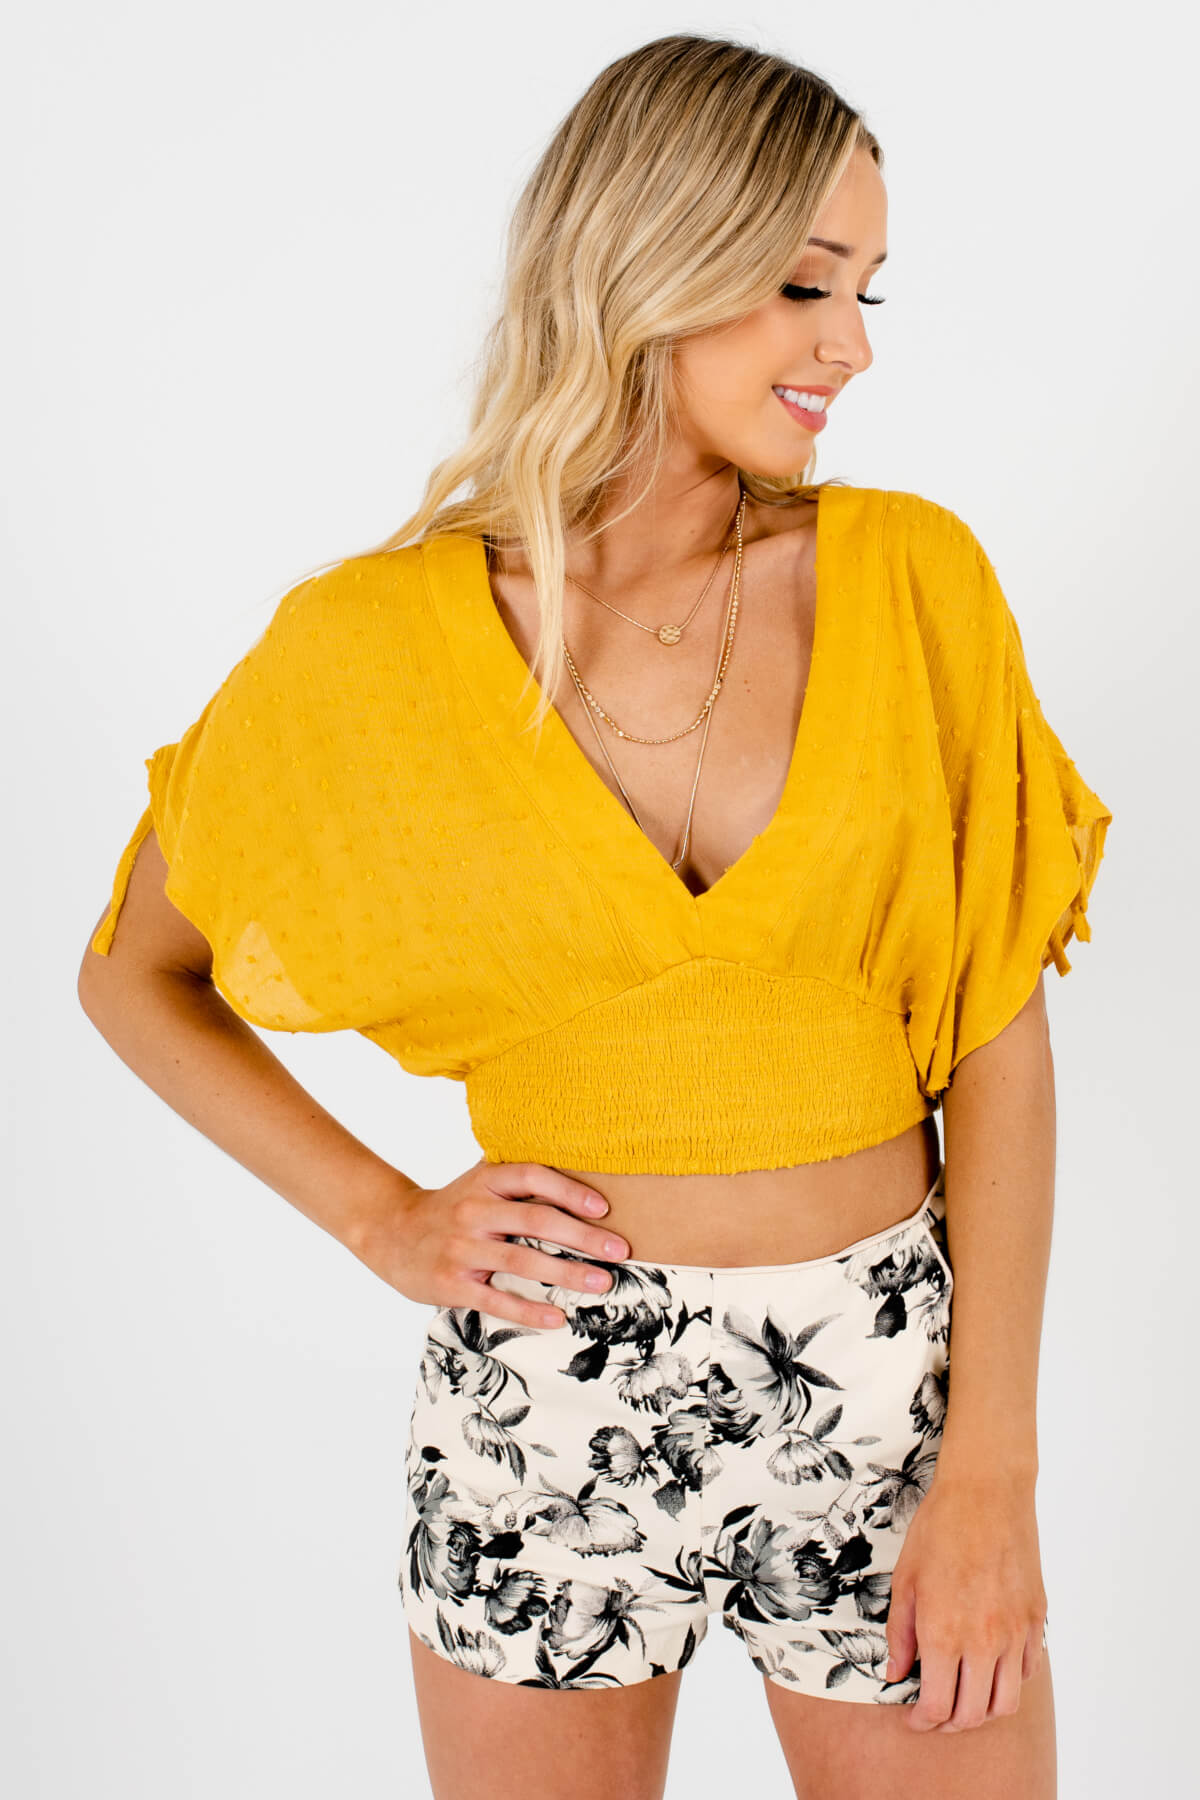 Mustard Yellow Cute and Comfortable Boutique Crop Tops for Women 